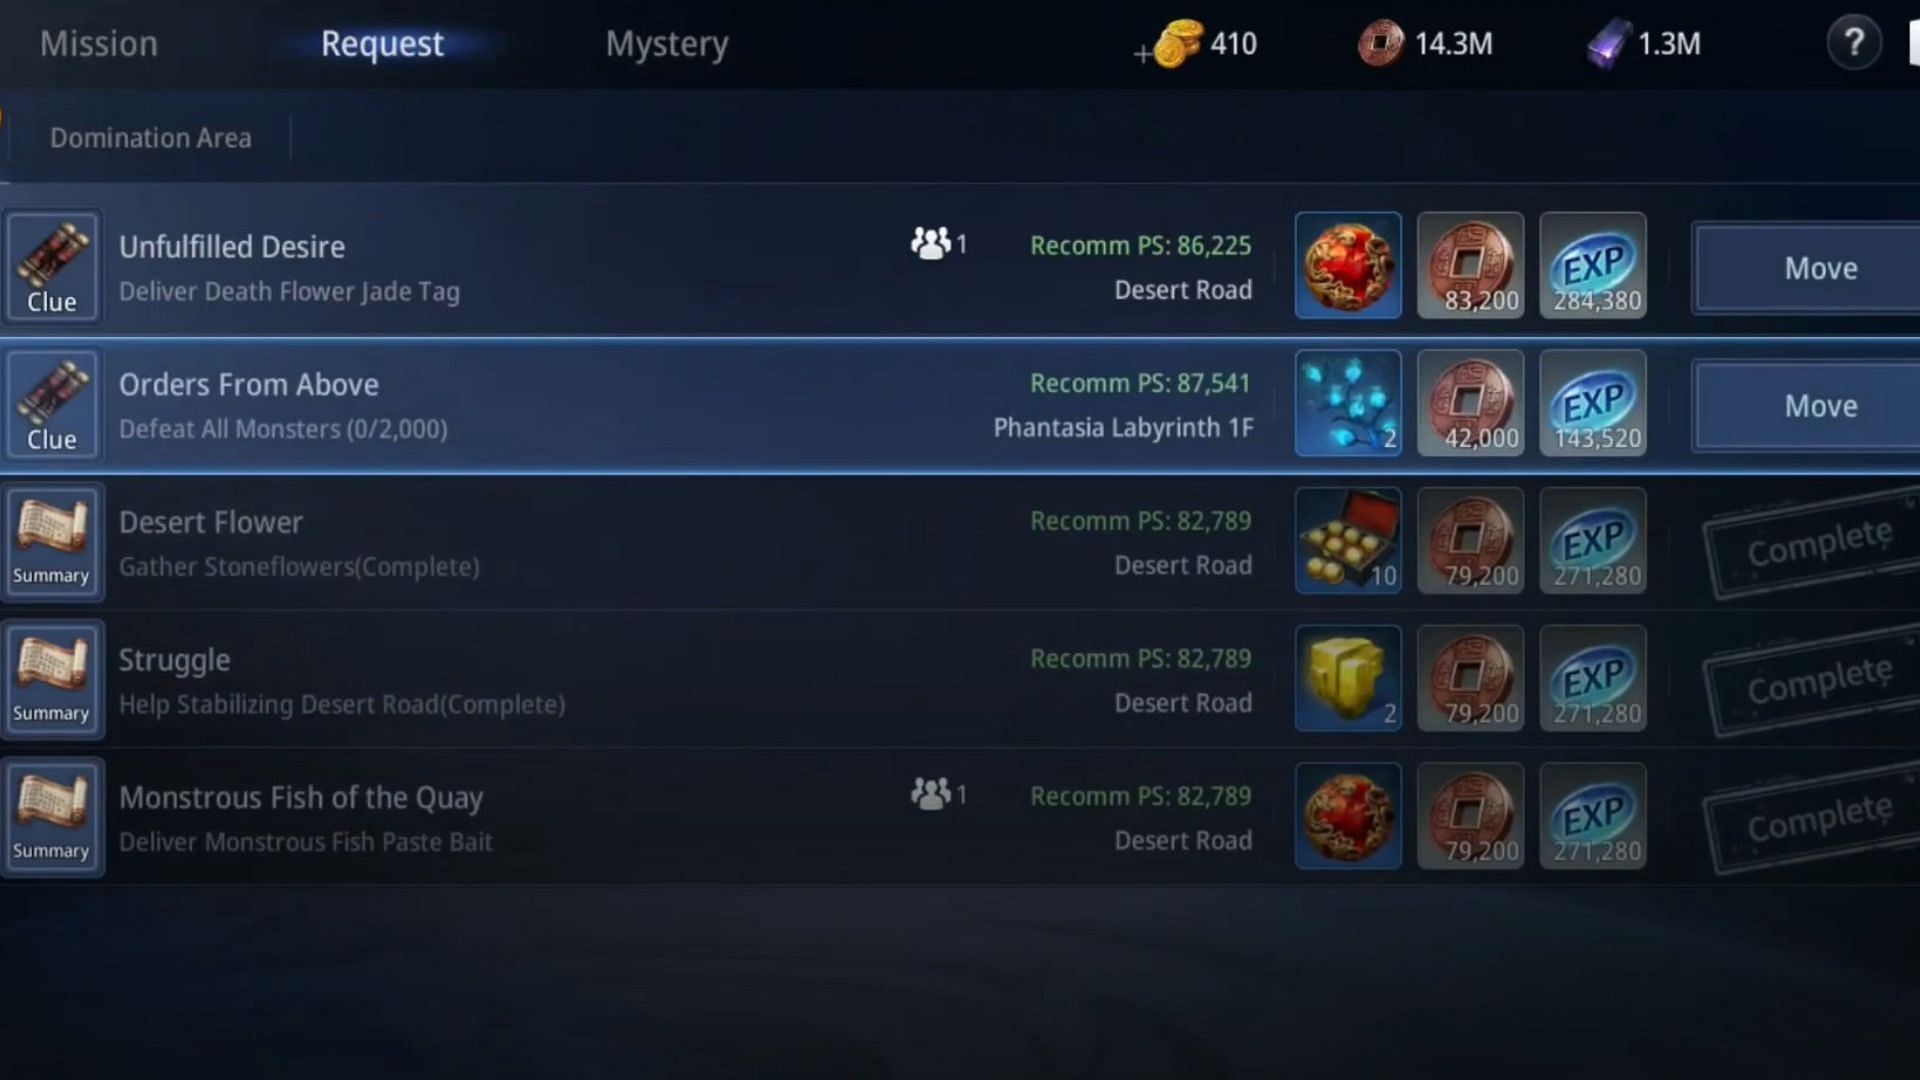 Missions and requests section (Image via WeMade)